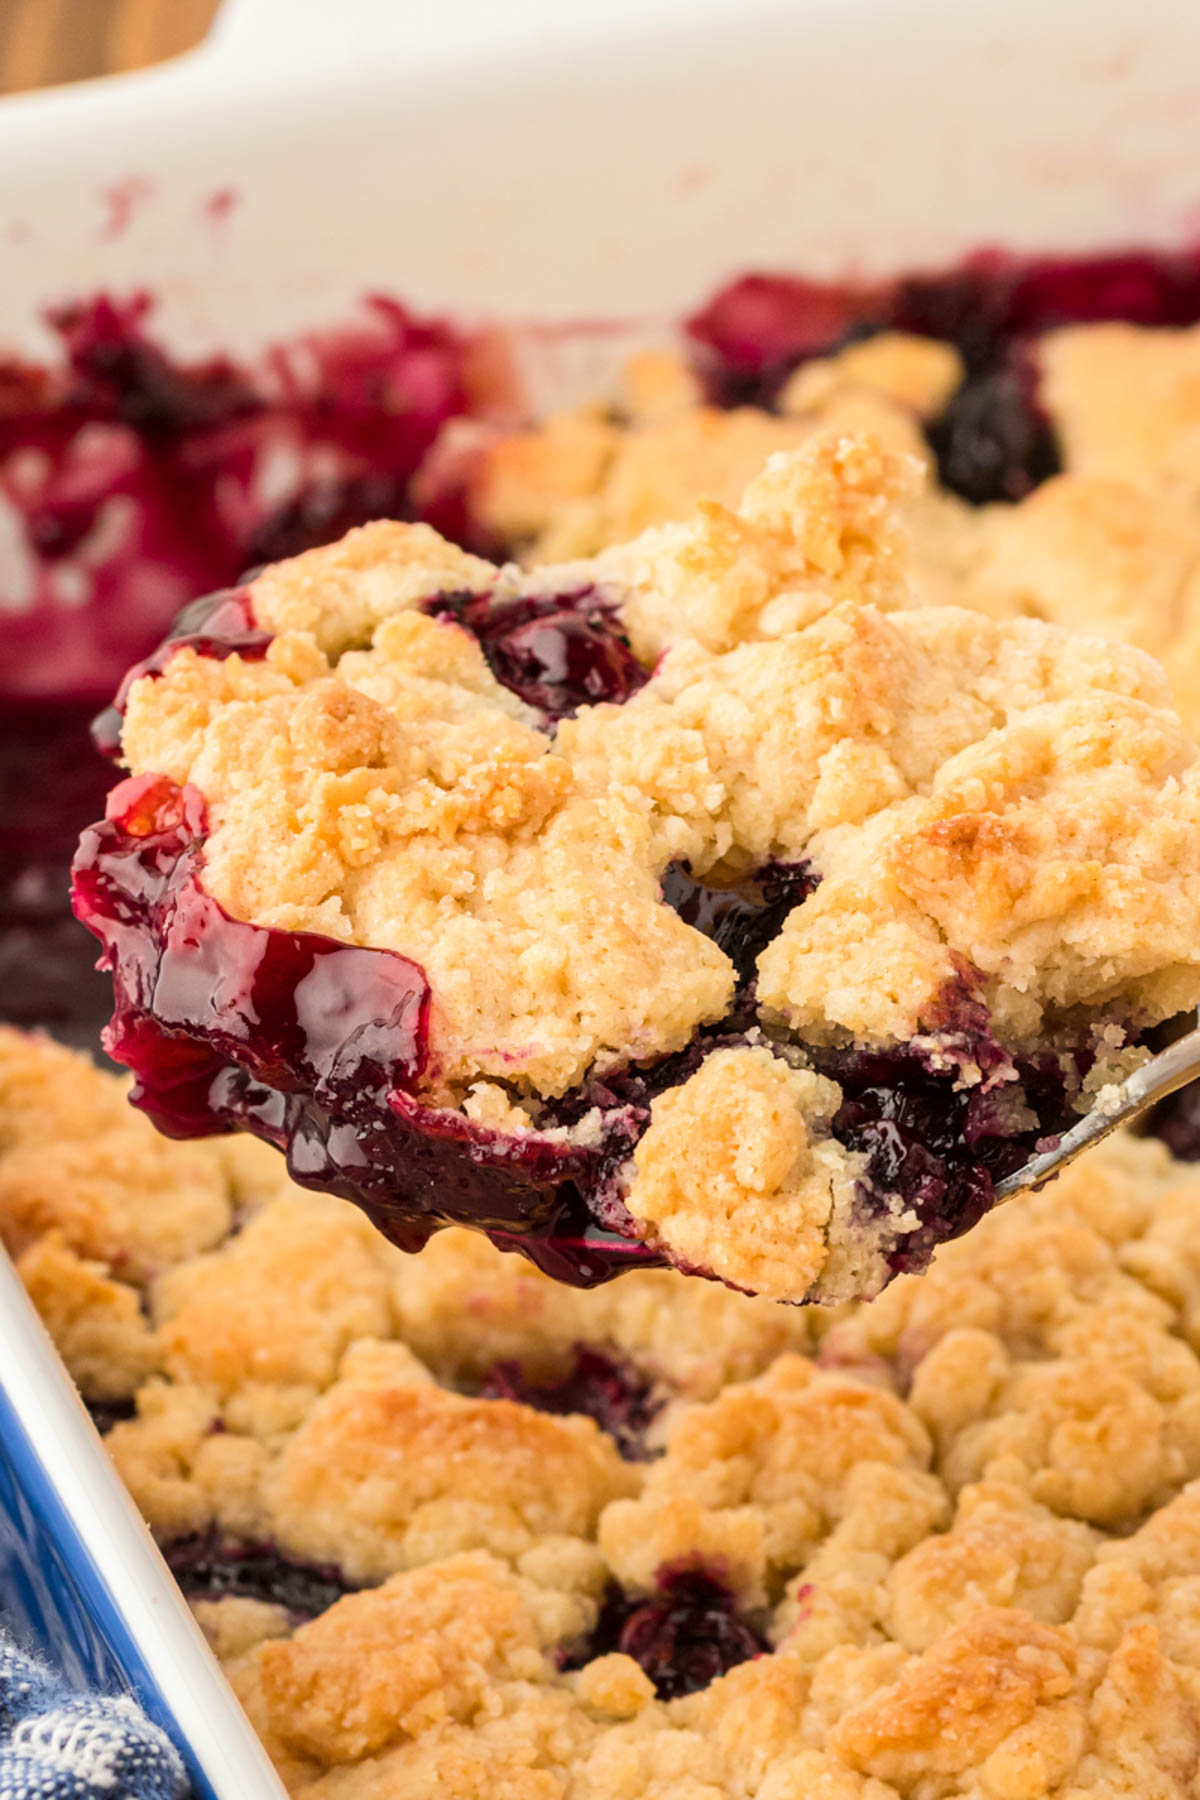 Blueberry cobbler being scooped out of a baking dish.